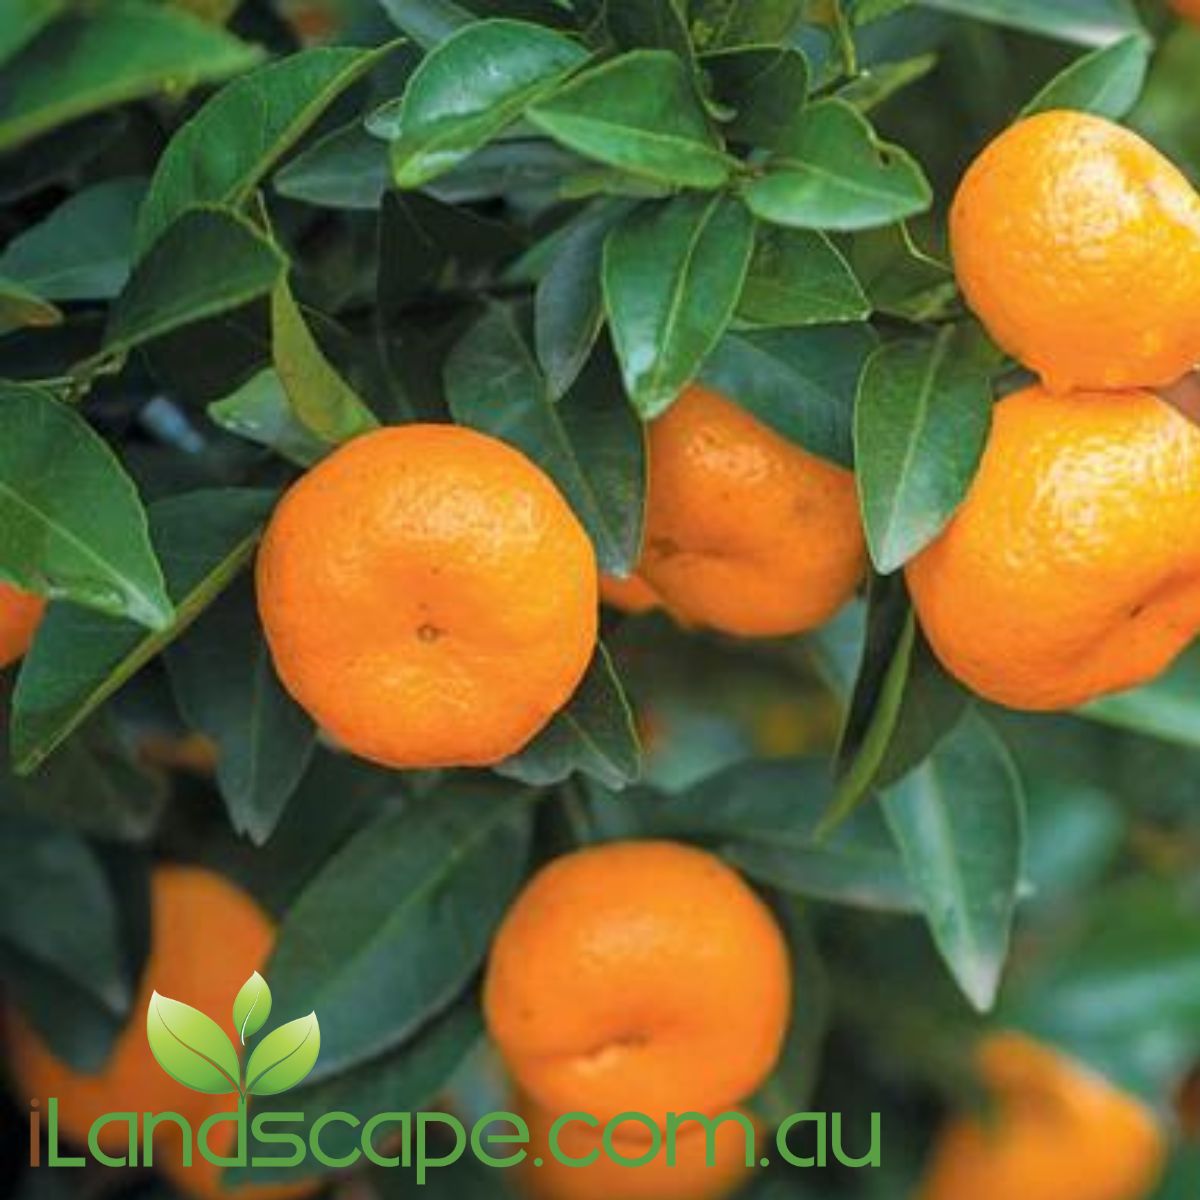 Mandarin Dwarf 'Imperial' will grow to approx. 1.0 - 2m tall and is perfect for pots or small gardens. will fruit between May - July each year  Fertilise seasonally with Fruit & Citrus food and prune regular to keep shape and promote more fruit development 